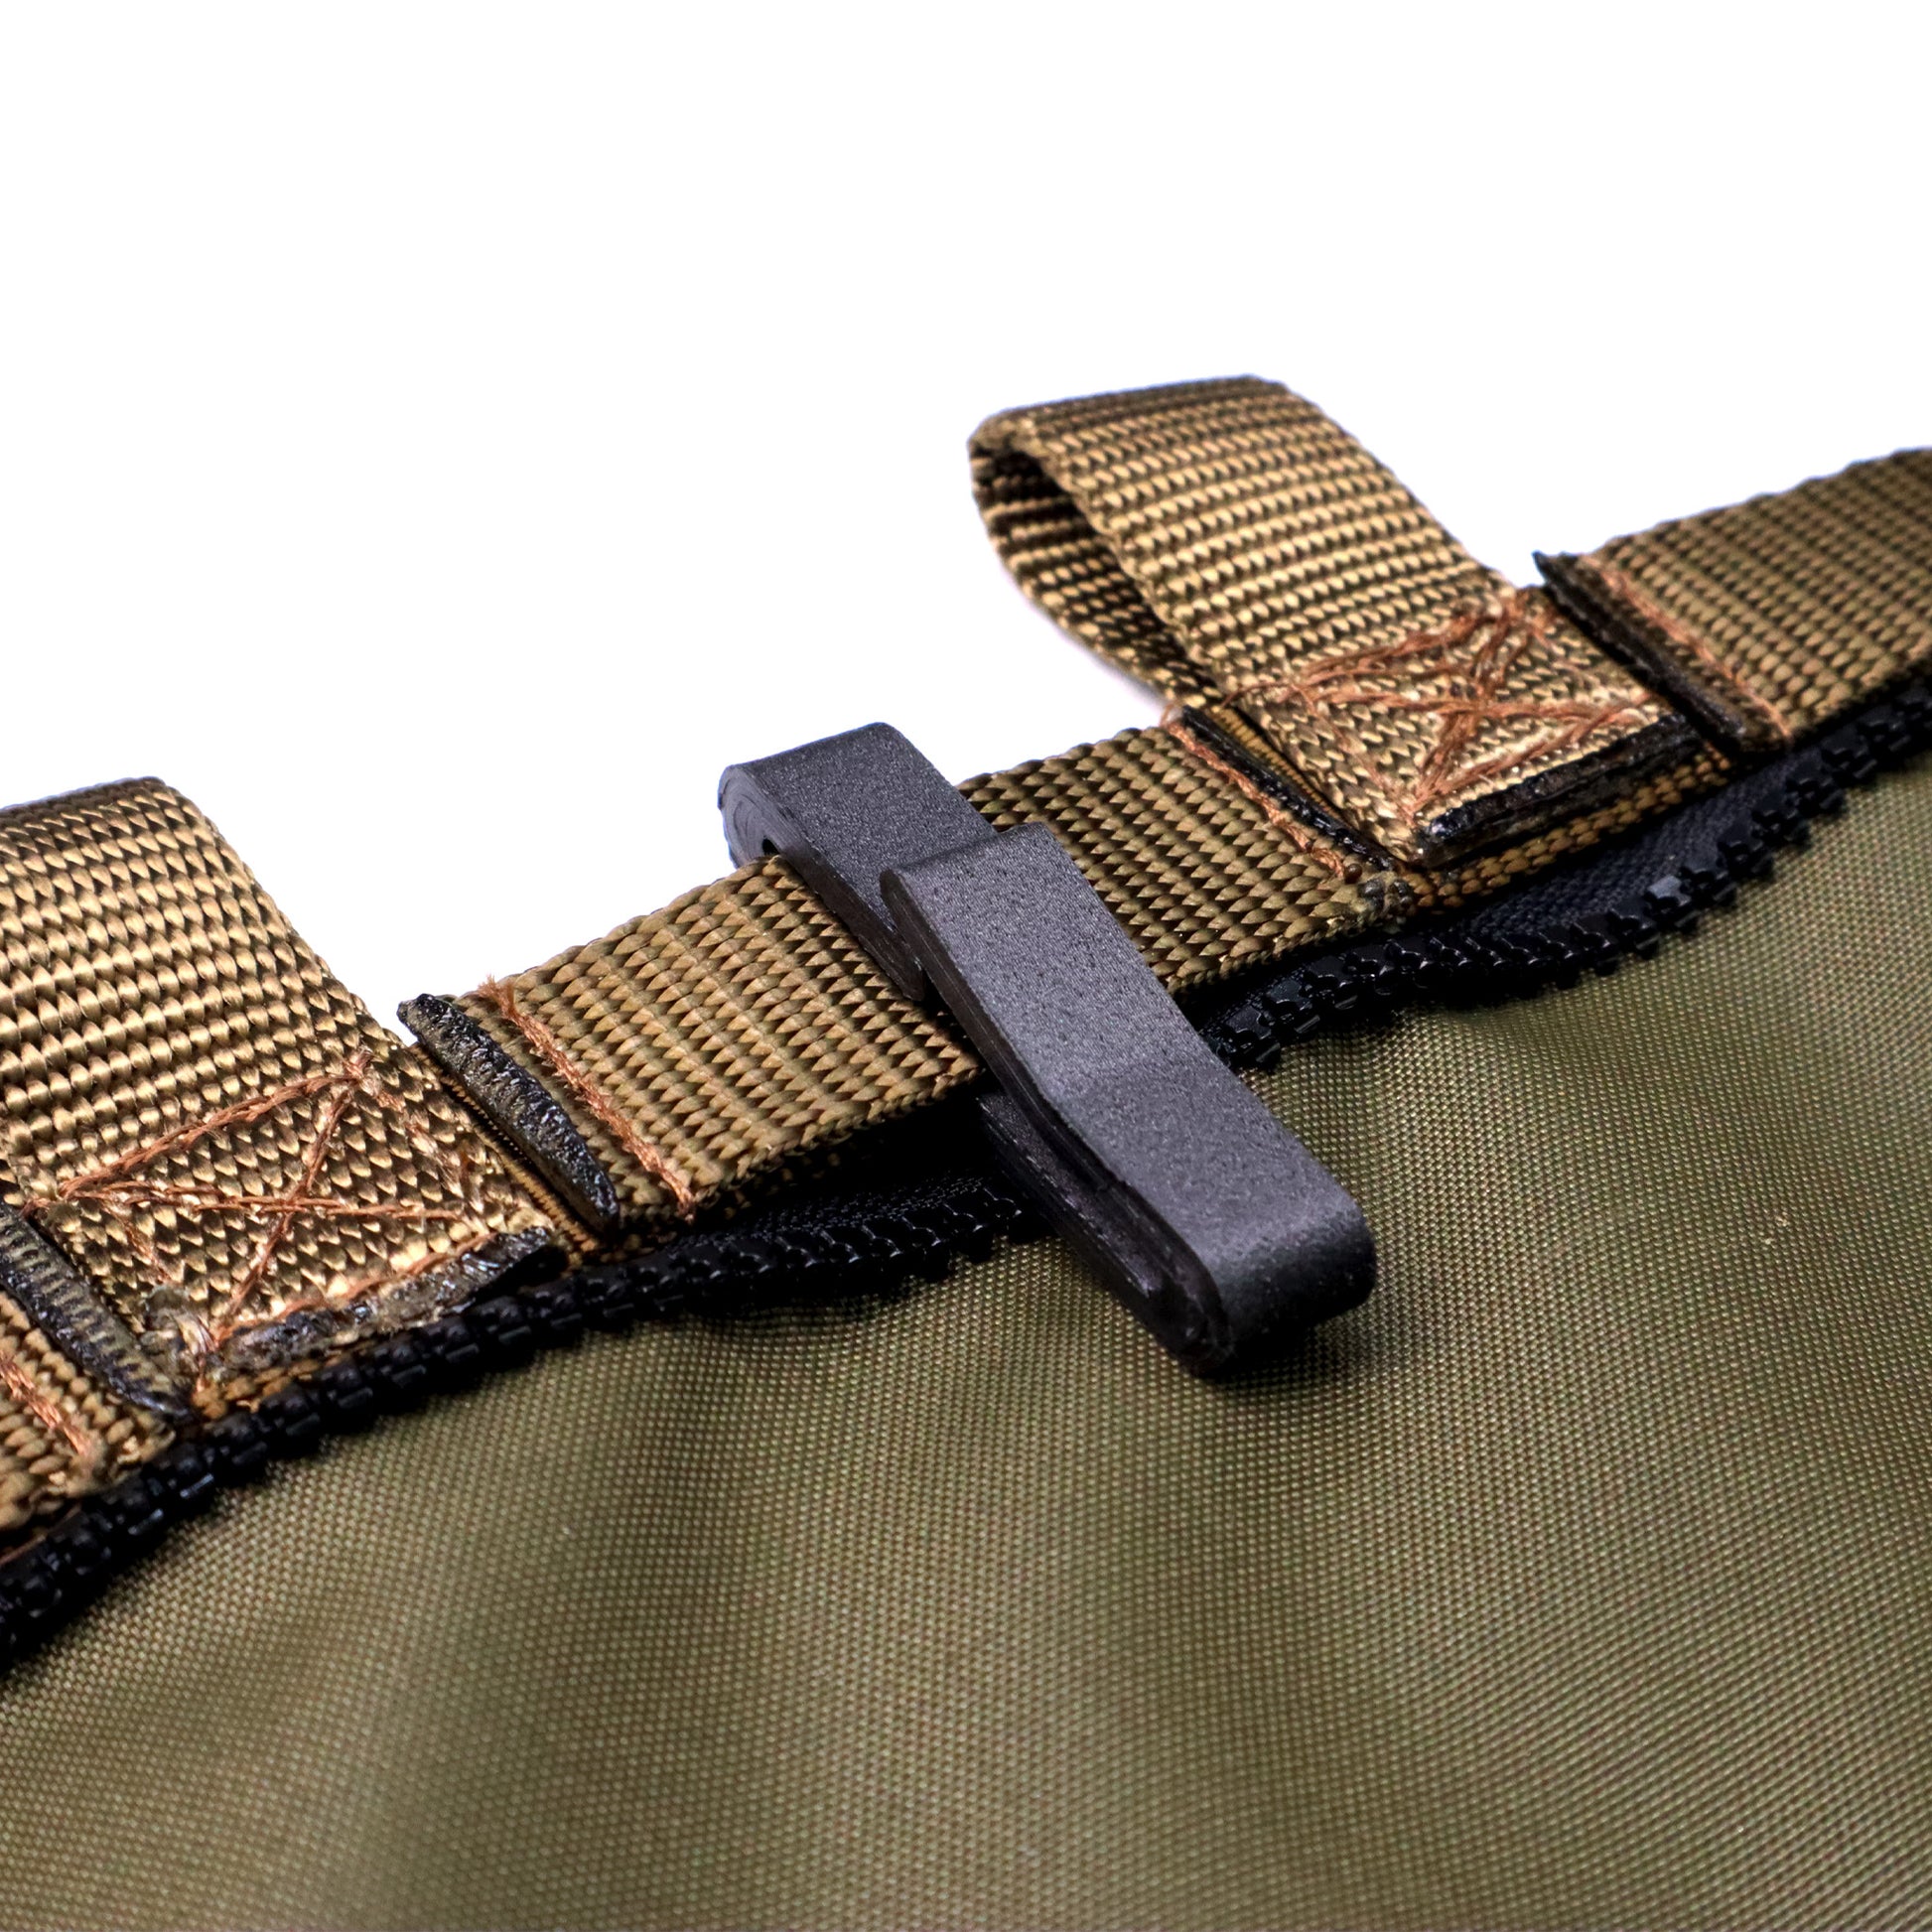 3D Printed Quick Attach Molle Webbing Clips – Hang Free™